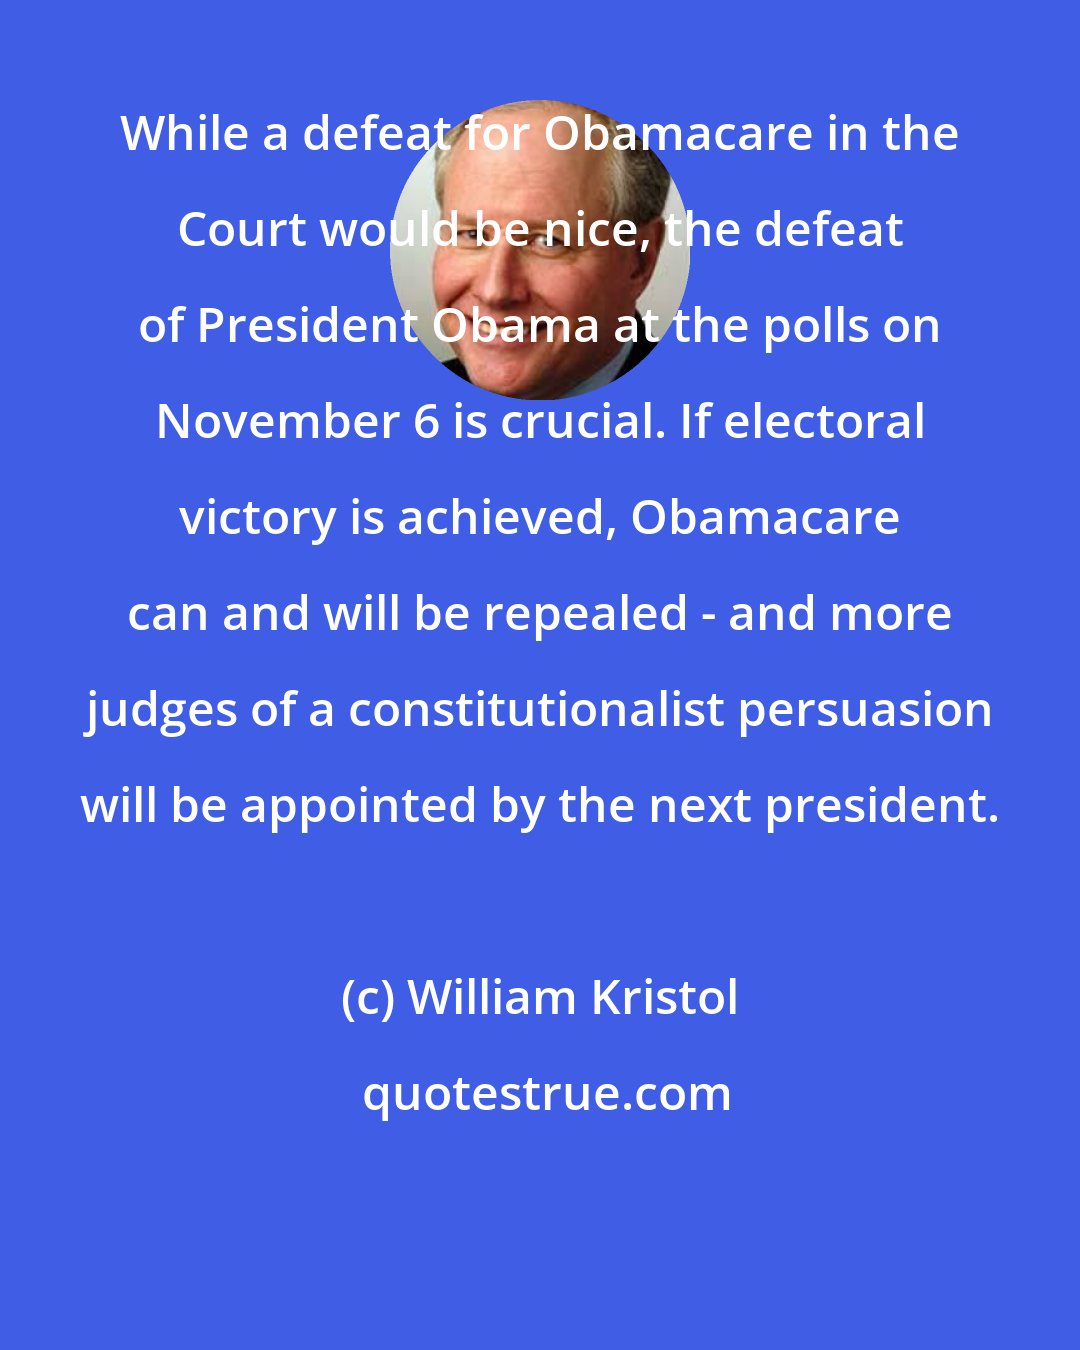 William Kristol: While a defeat for Obamacare in the Court would be nice, the defeat of President Obama at the polls on November 6 is crucial. If electoral victory is achieved, Obamacare can and will be repealed - and more judges of a constitutionalist persuasion will be appointed by the next president.